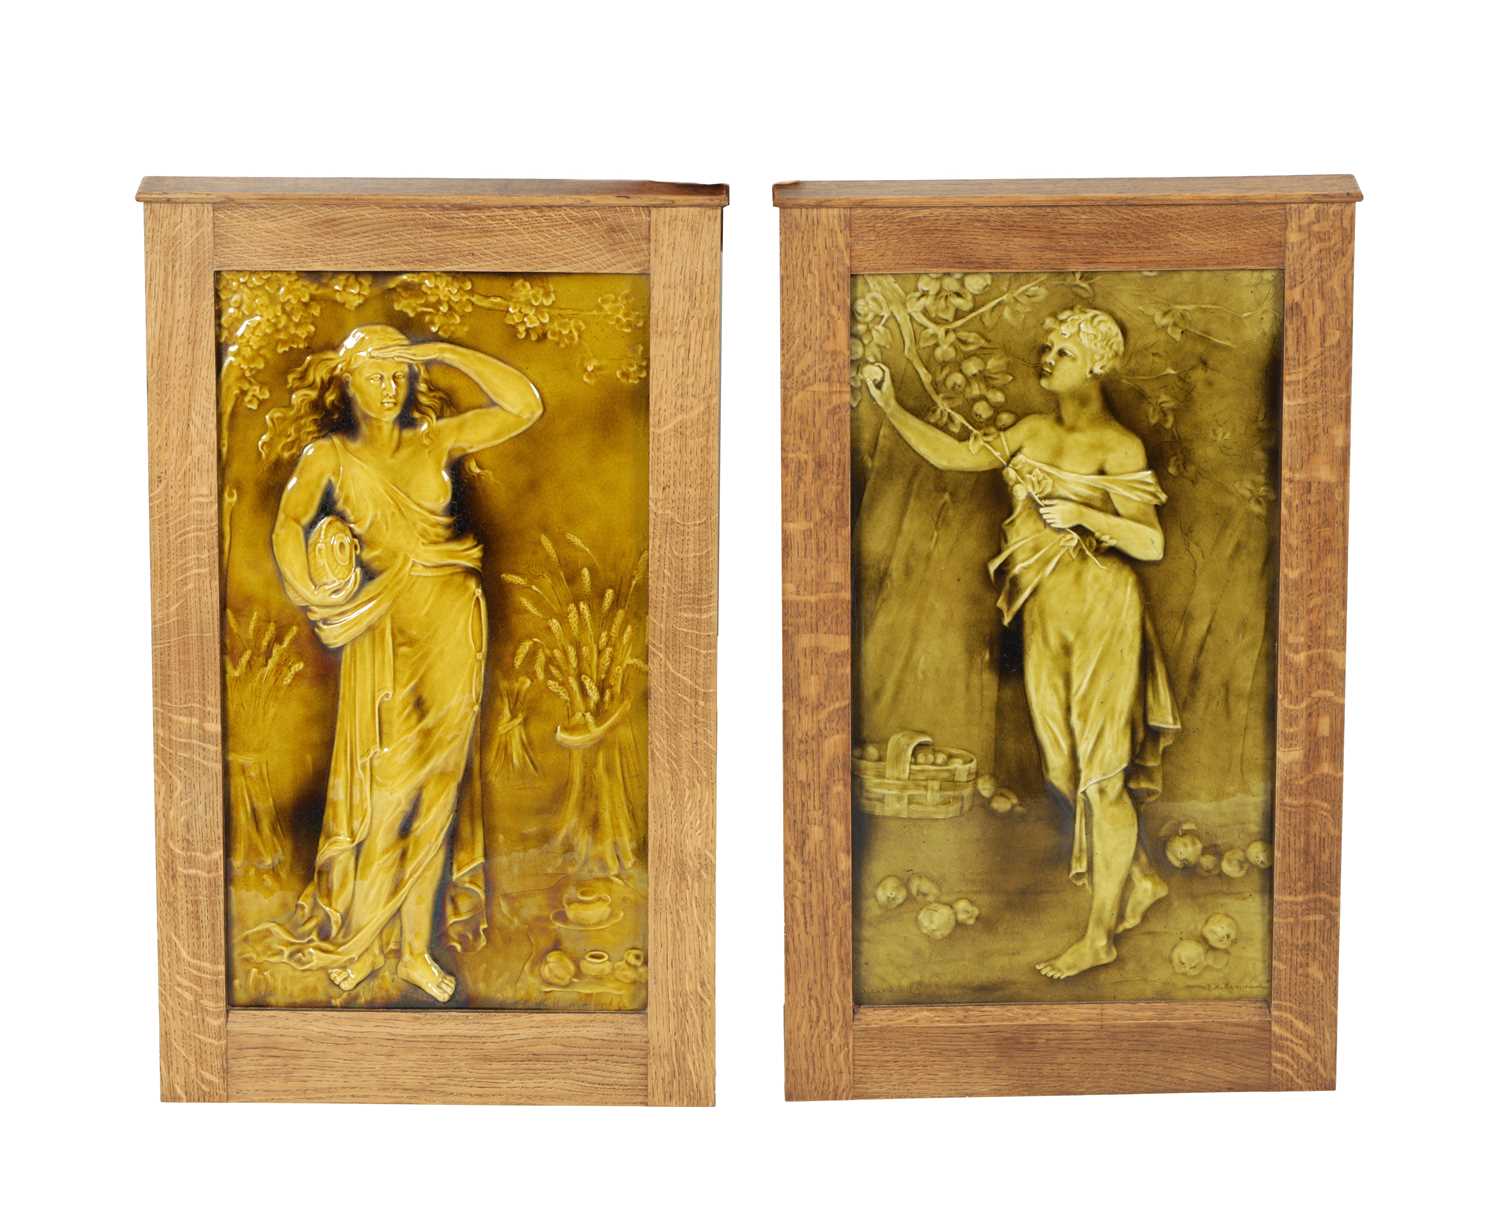 Lot 46 - A MATCHED PAIR OF EARLY 20TH CENTURY BURMANTOFTS GREEN GLAZED HANGING PLAQUES BY J. T. HAMMONDS.